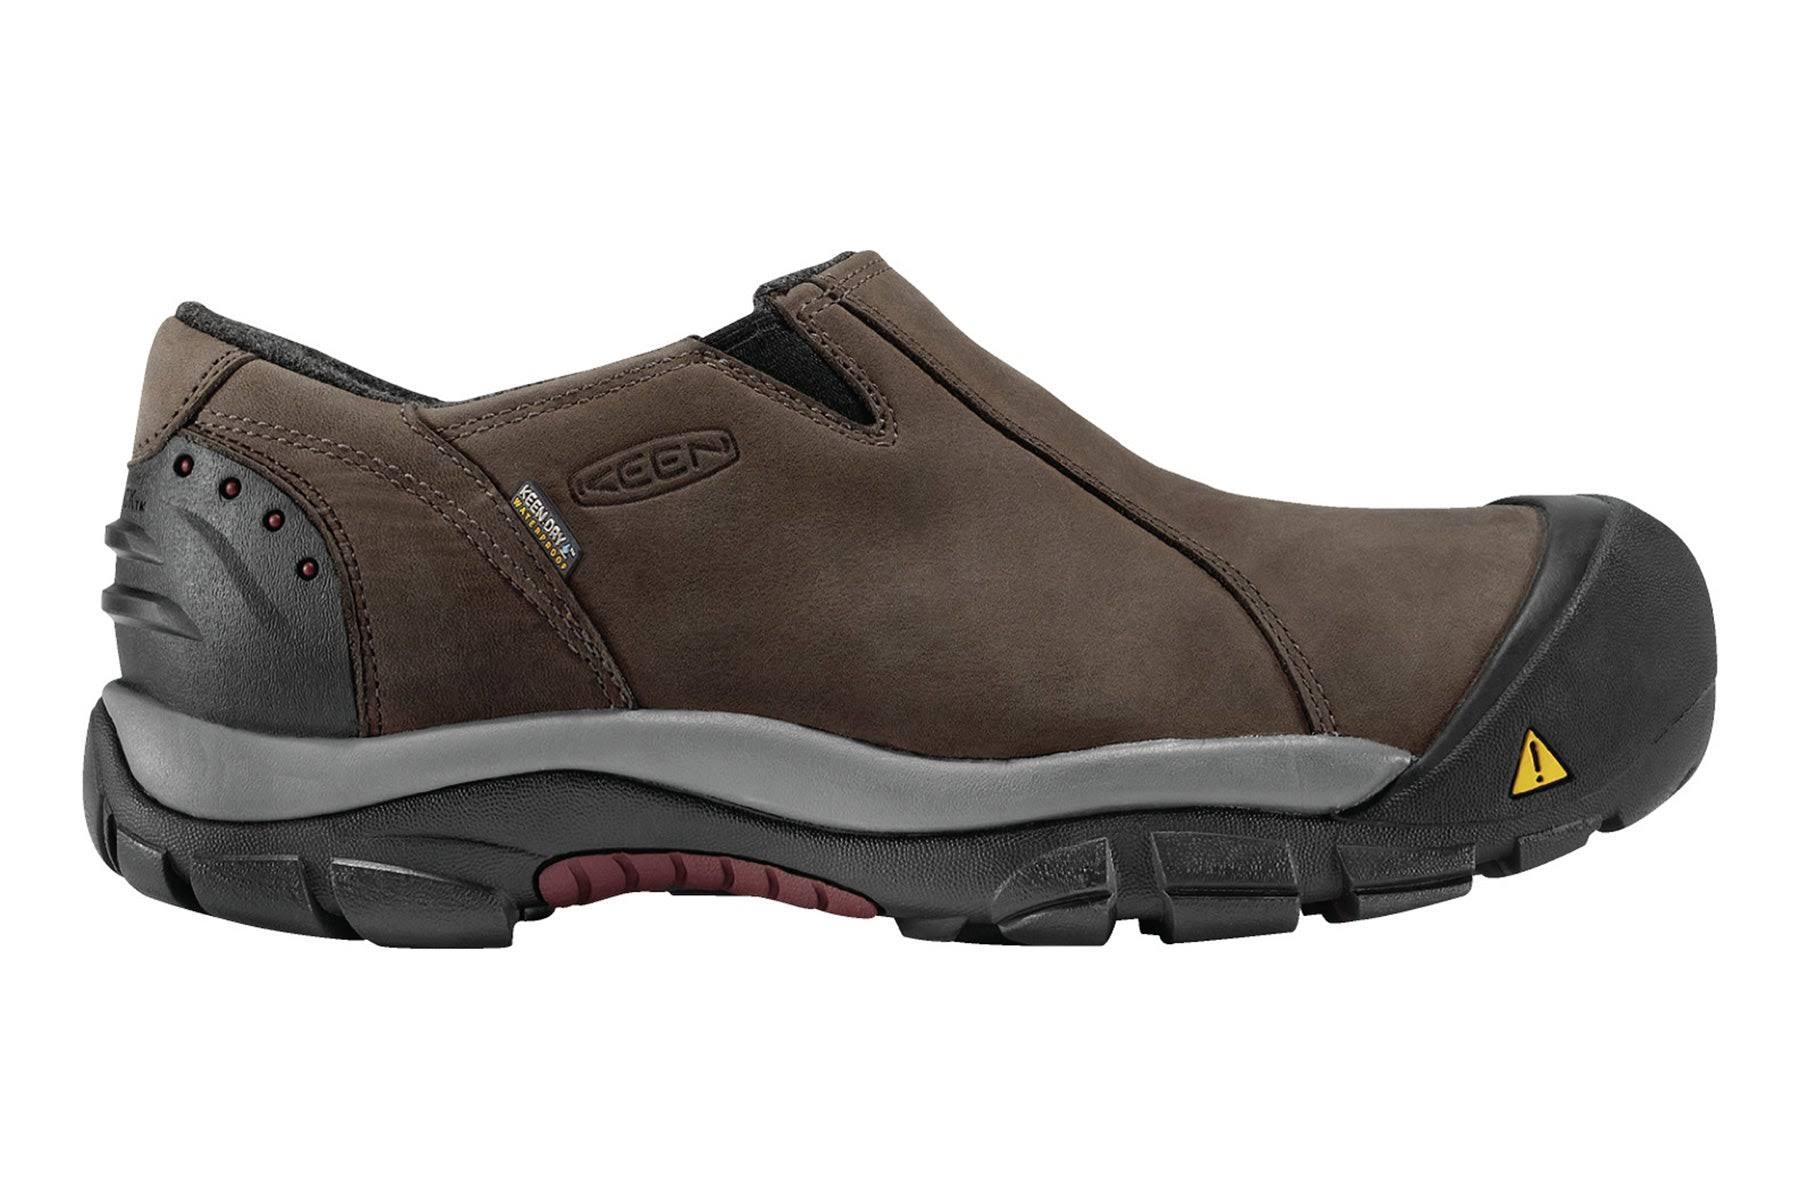 Keen Men's Brixen Low Waterproof Insulated Shoes - Slate Black and Madder Brown, 9 USm